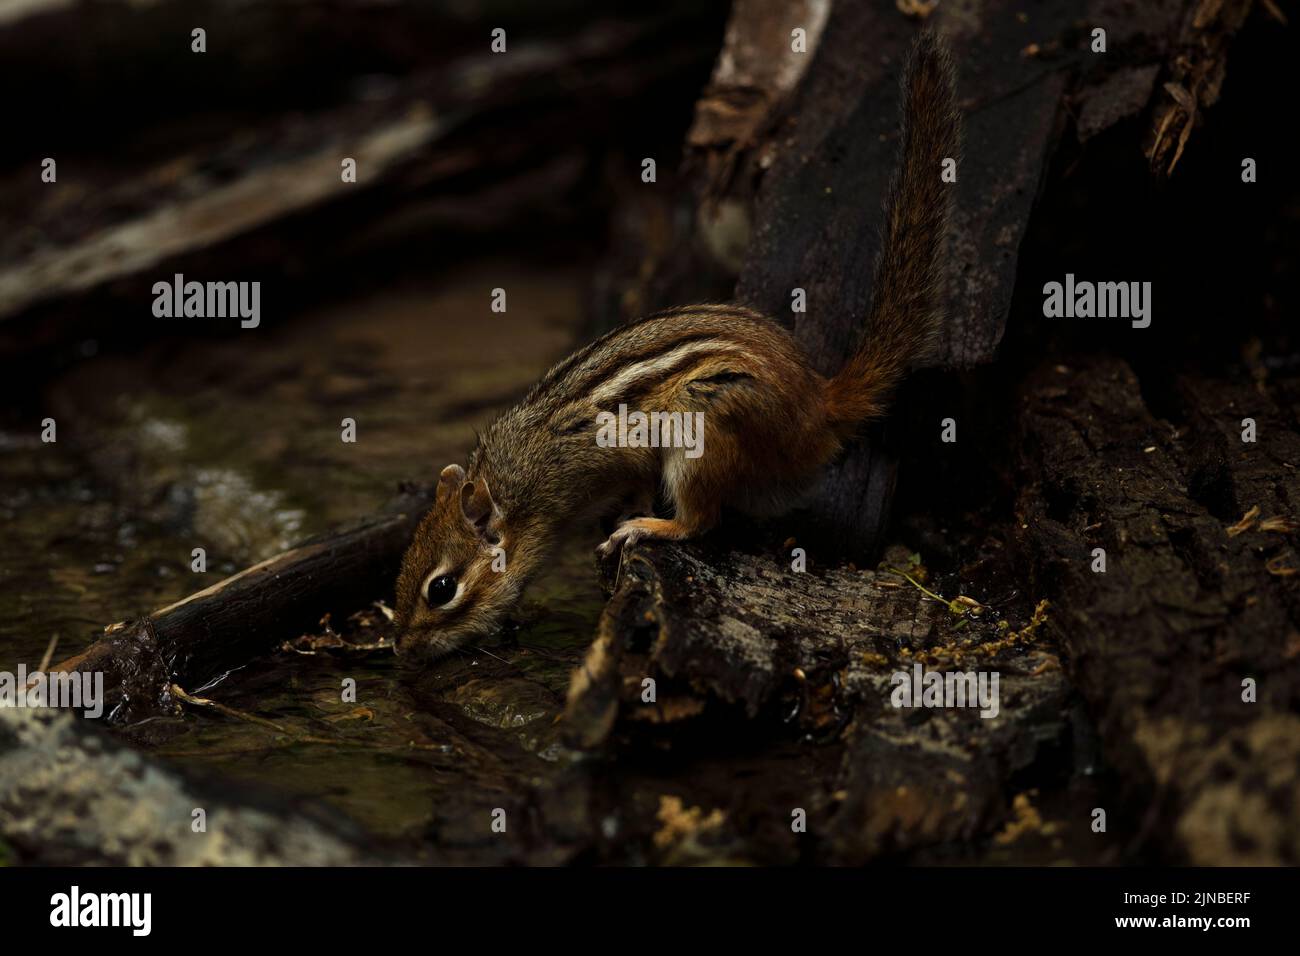 An eastern chipmunk takes a drink in a stream. Stock Photo